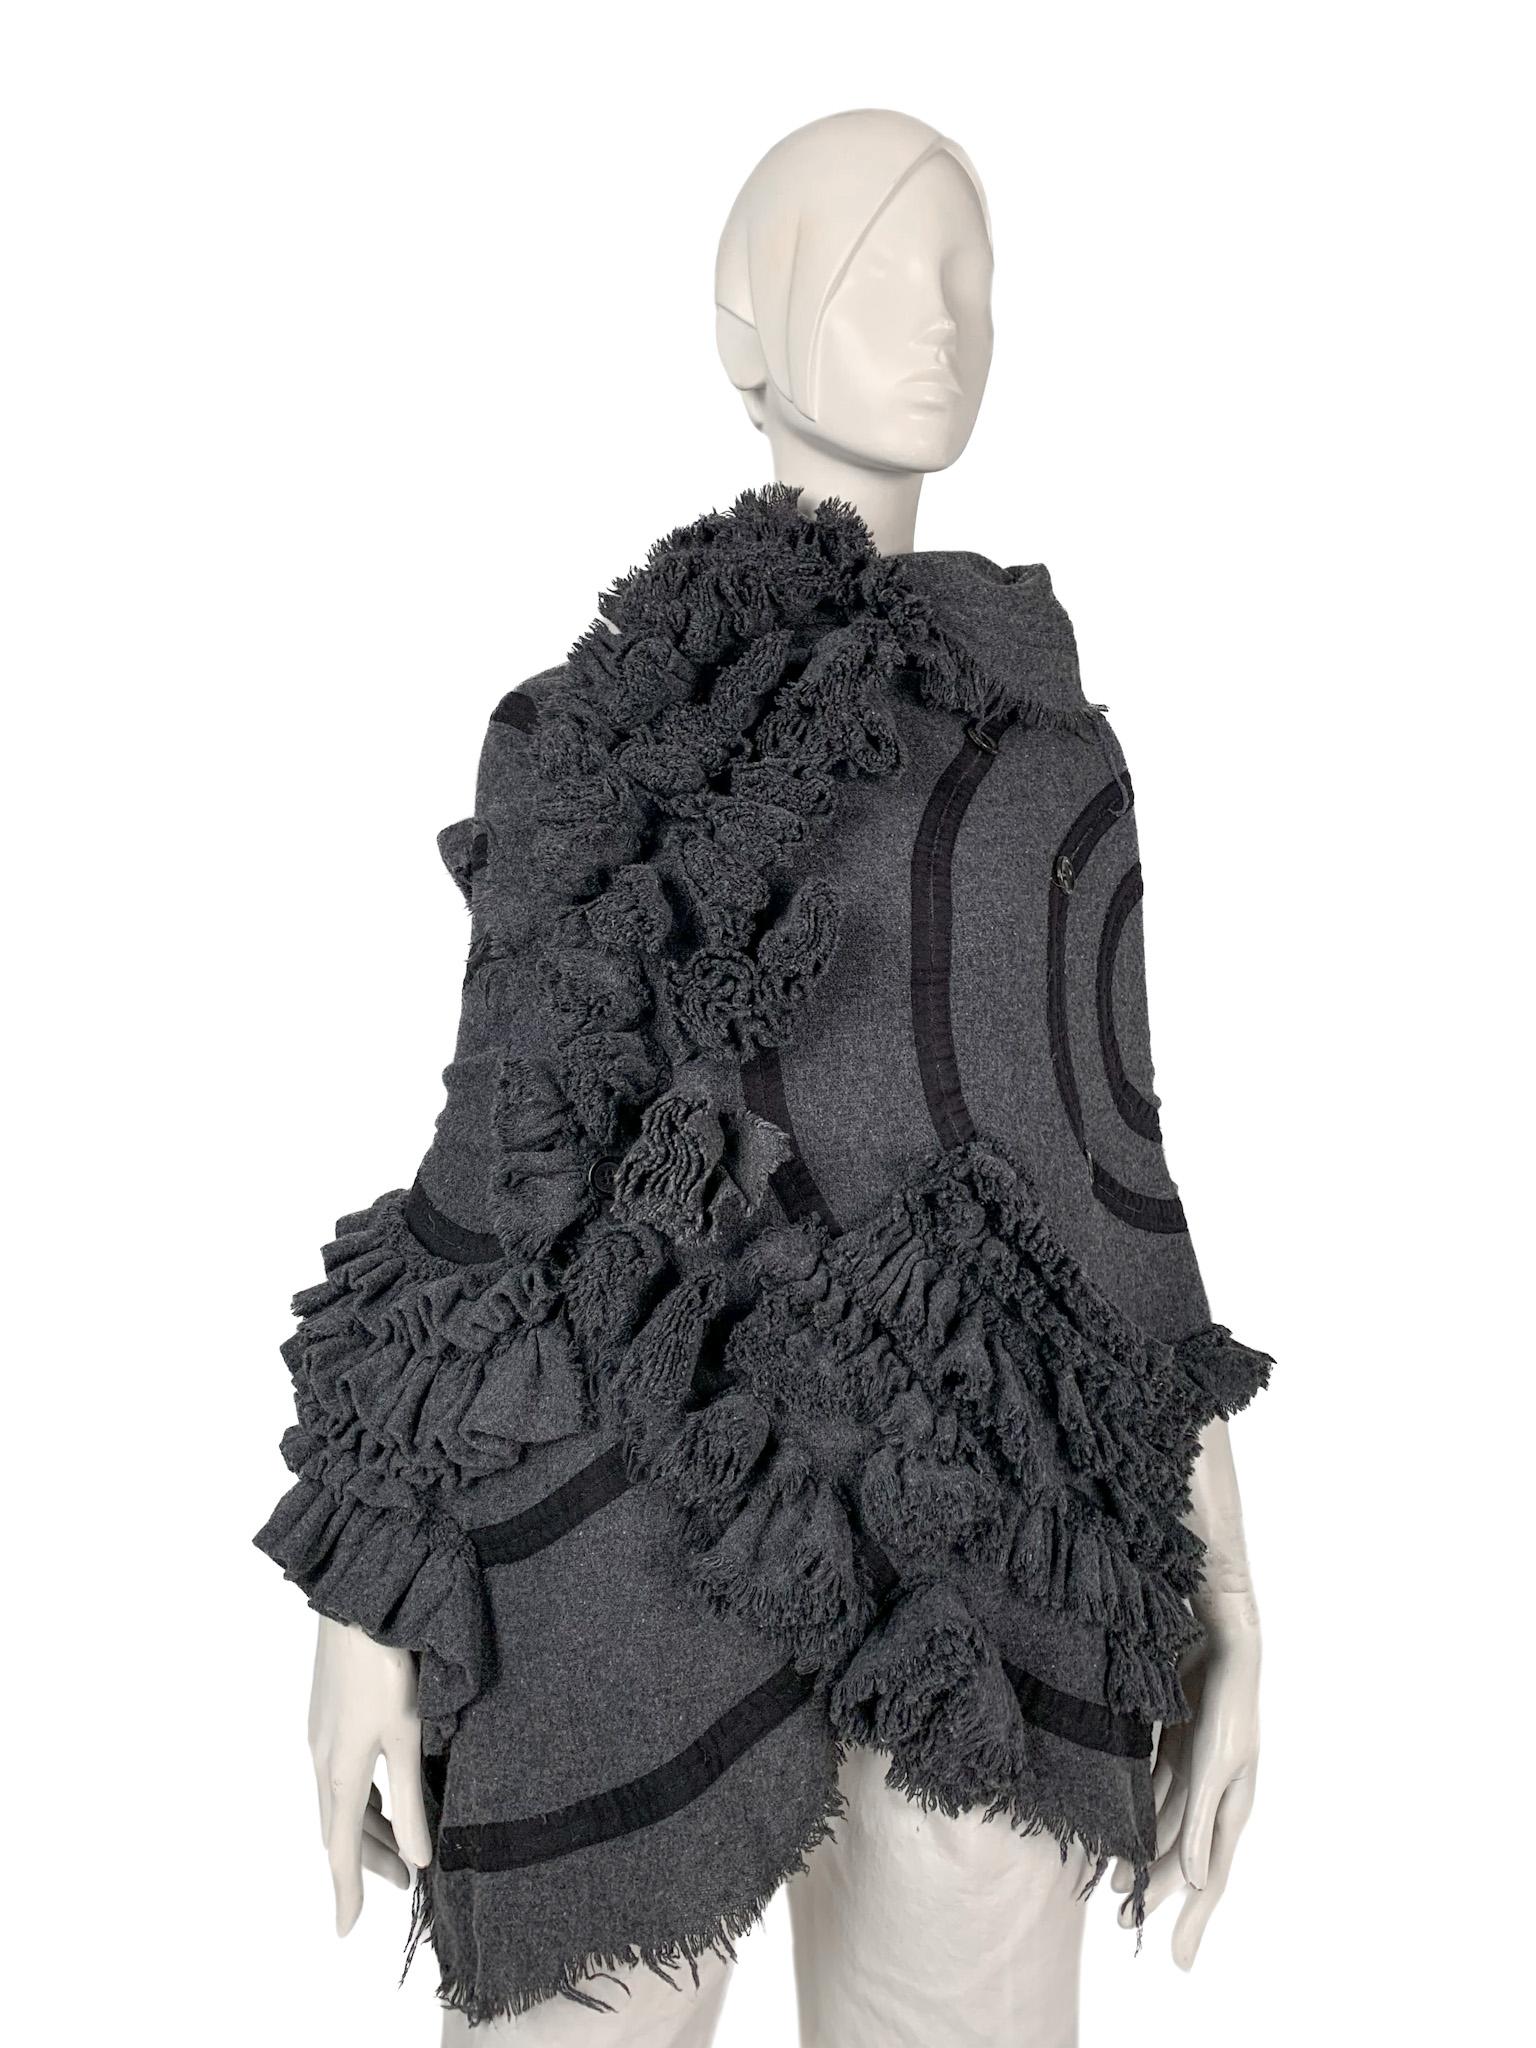 TAO Comme des Garcons AW 2006 cape/knitwear piece with asymmetric three-dimensional appliques.
A truly avant-guarde creation, allowing for endless options of wearing it. It consists of two huge pieces of fabric interconnected with functional